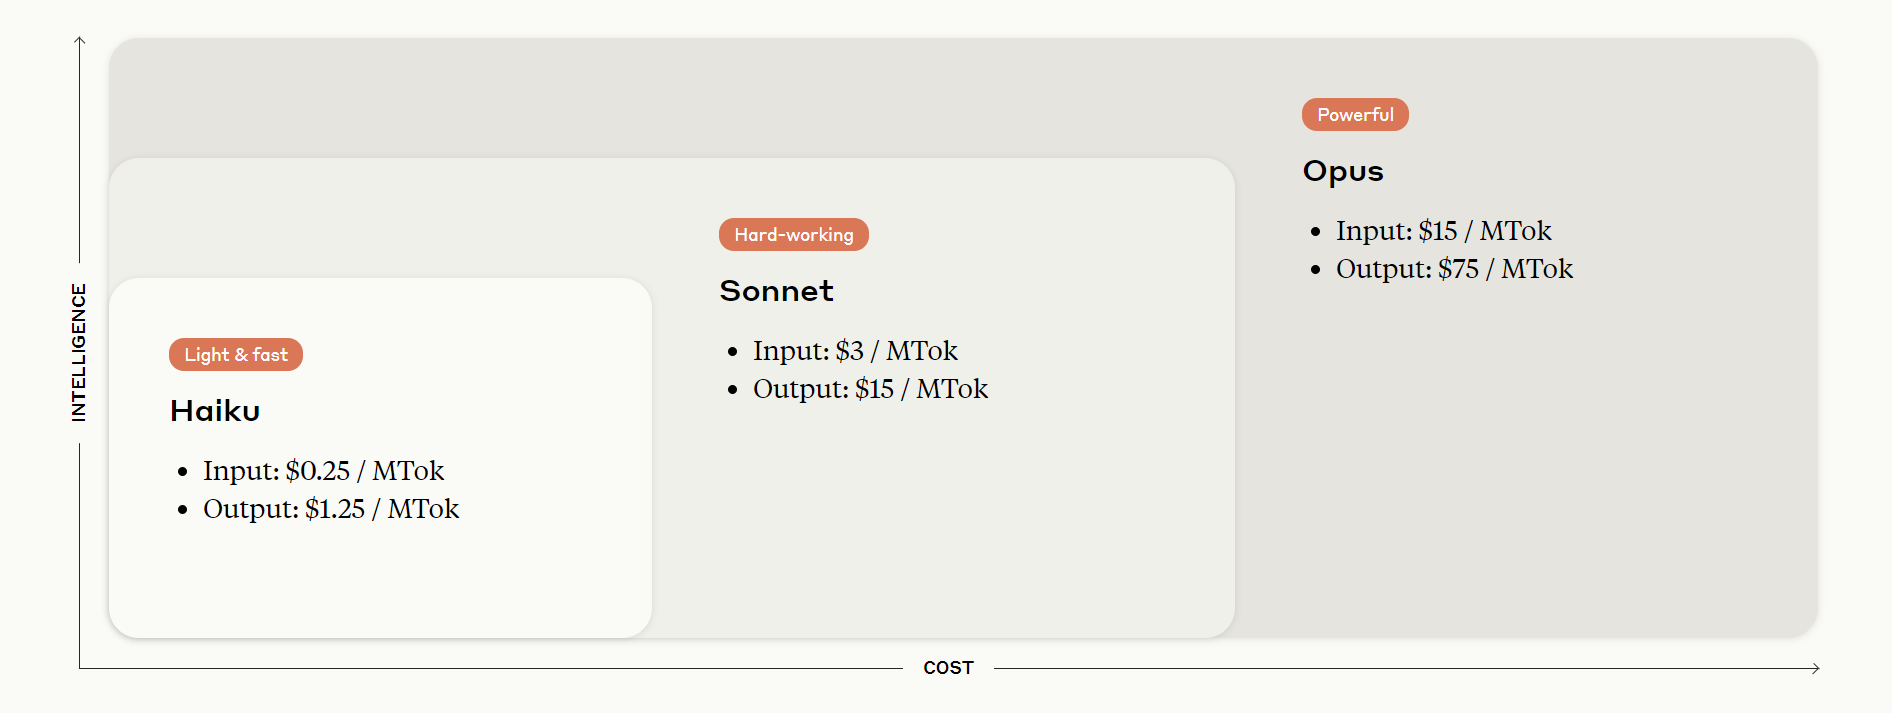 The image is a chart comparing the cost and performance of three AI language models - Haiku, Sonnet and Opus.